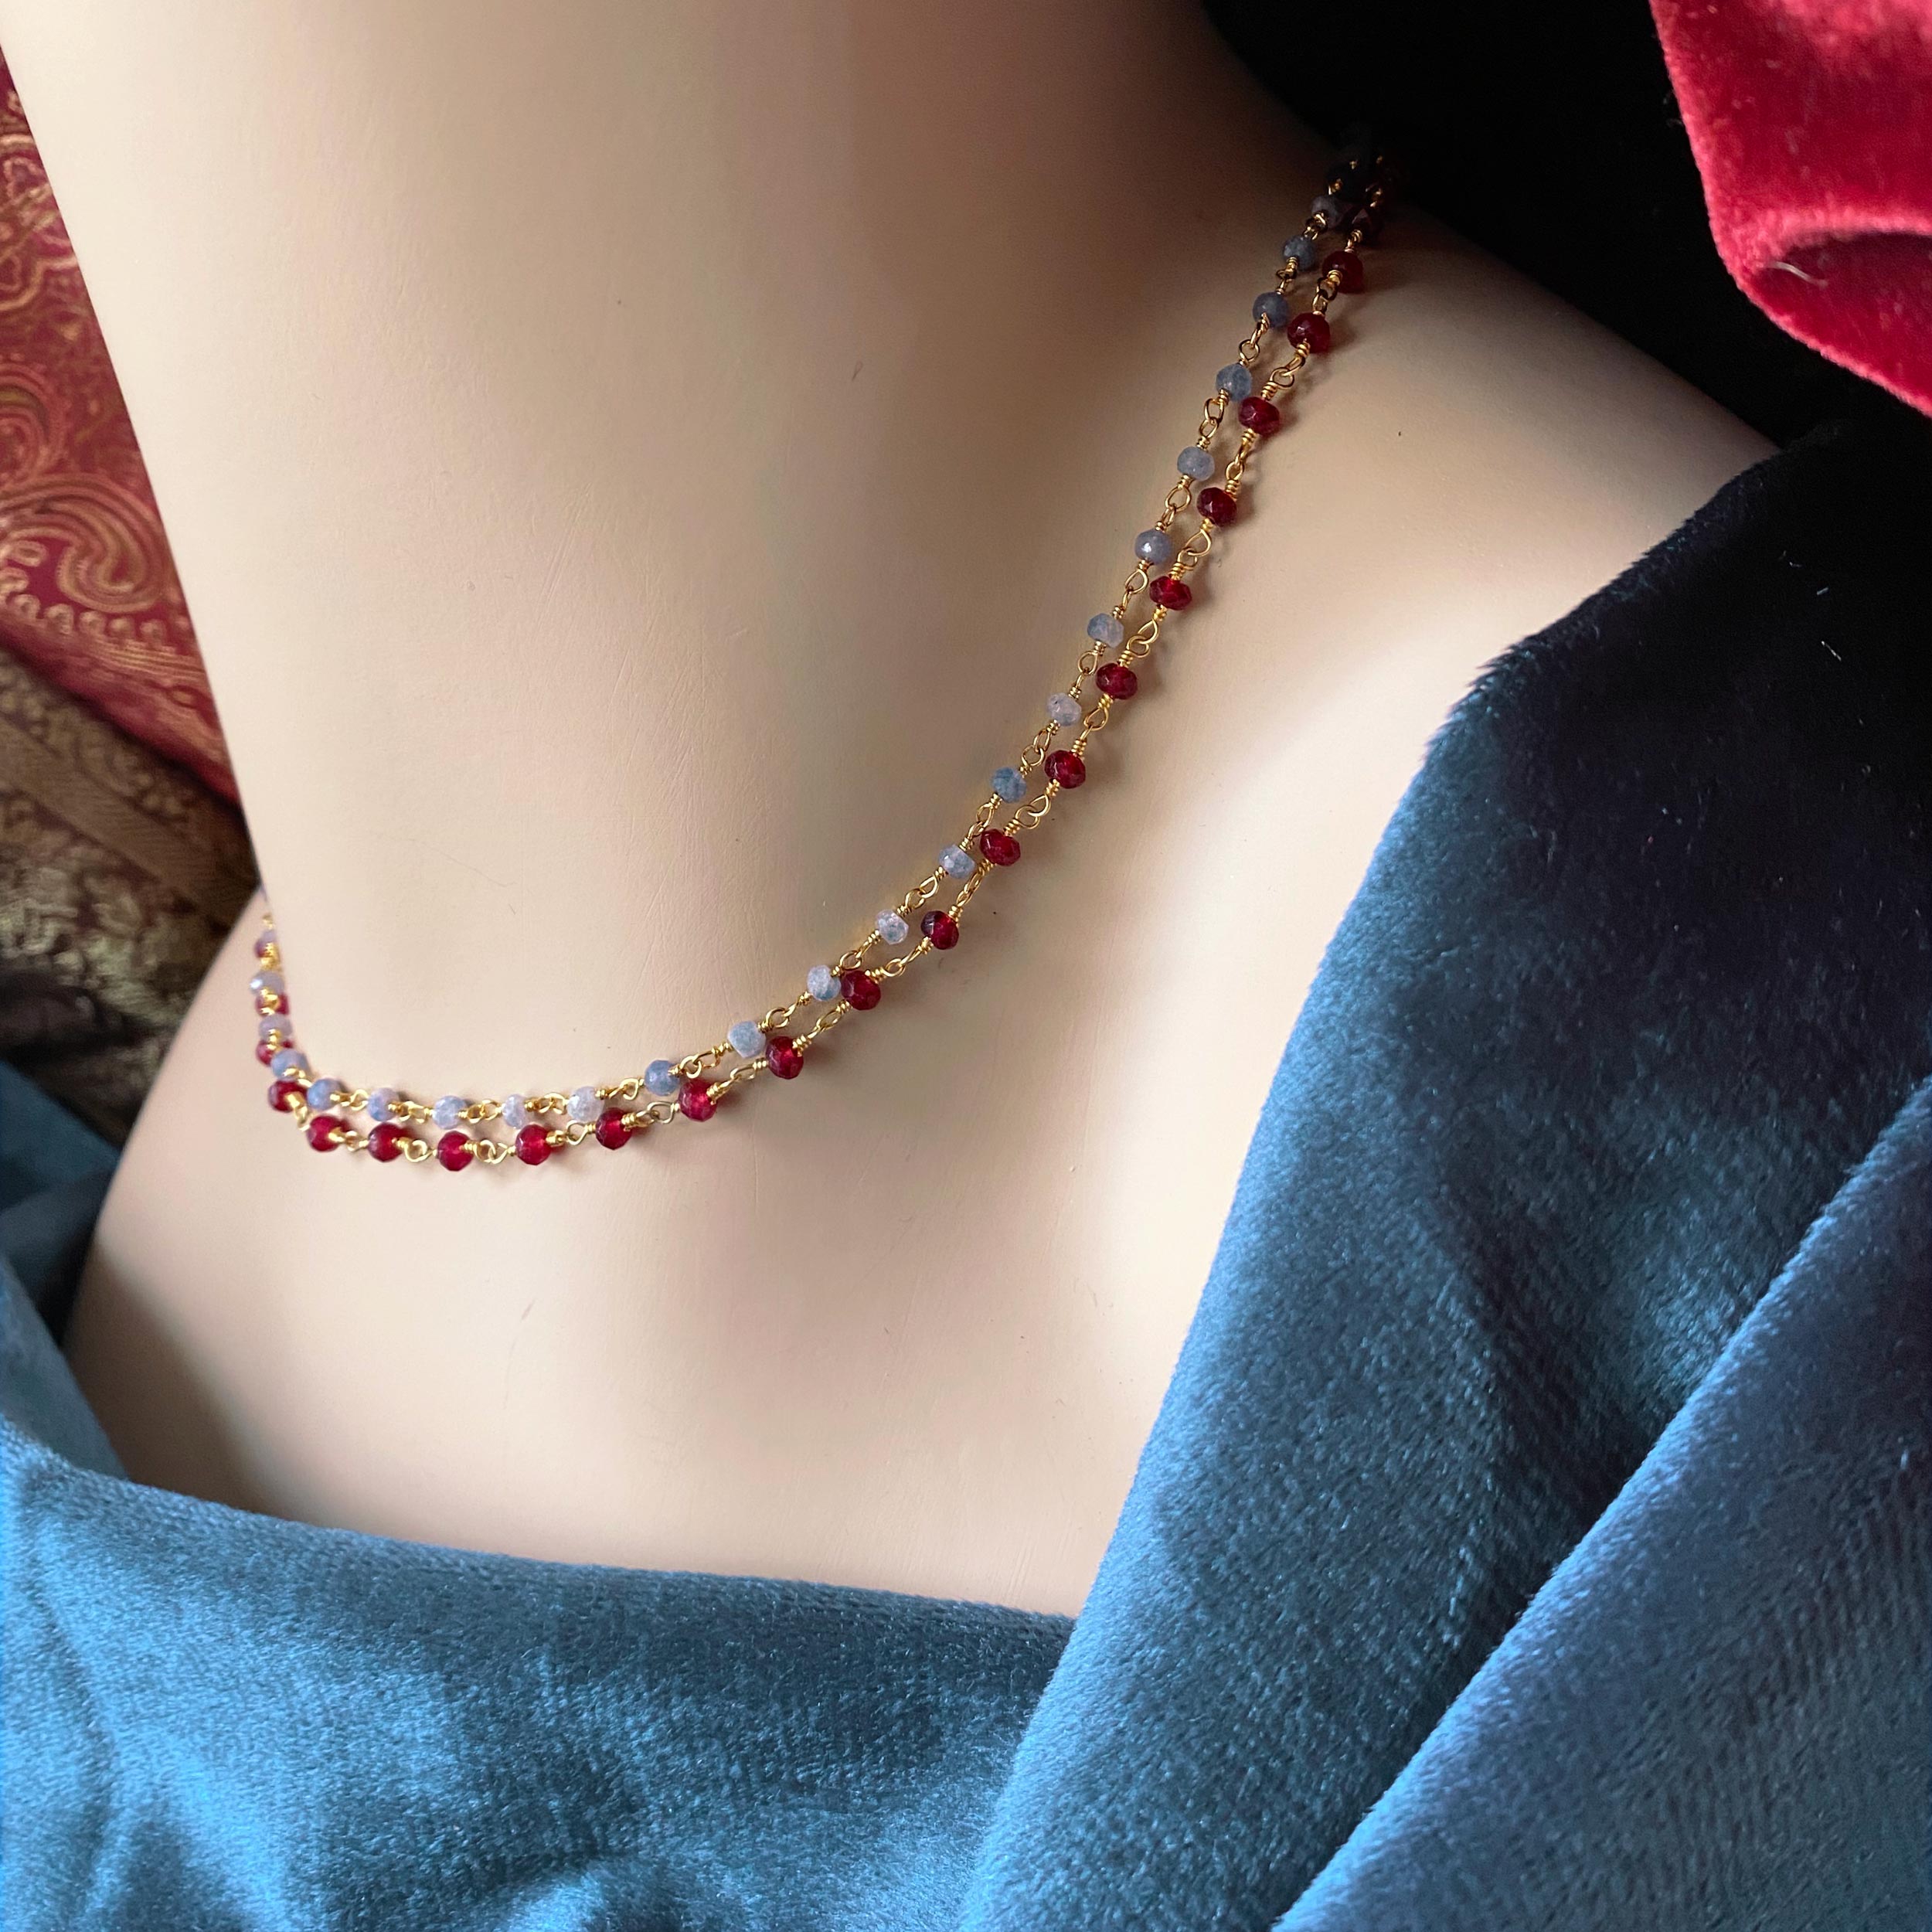 Garnet necklace with sapphires